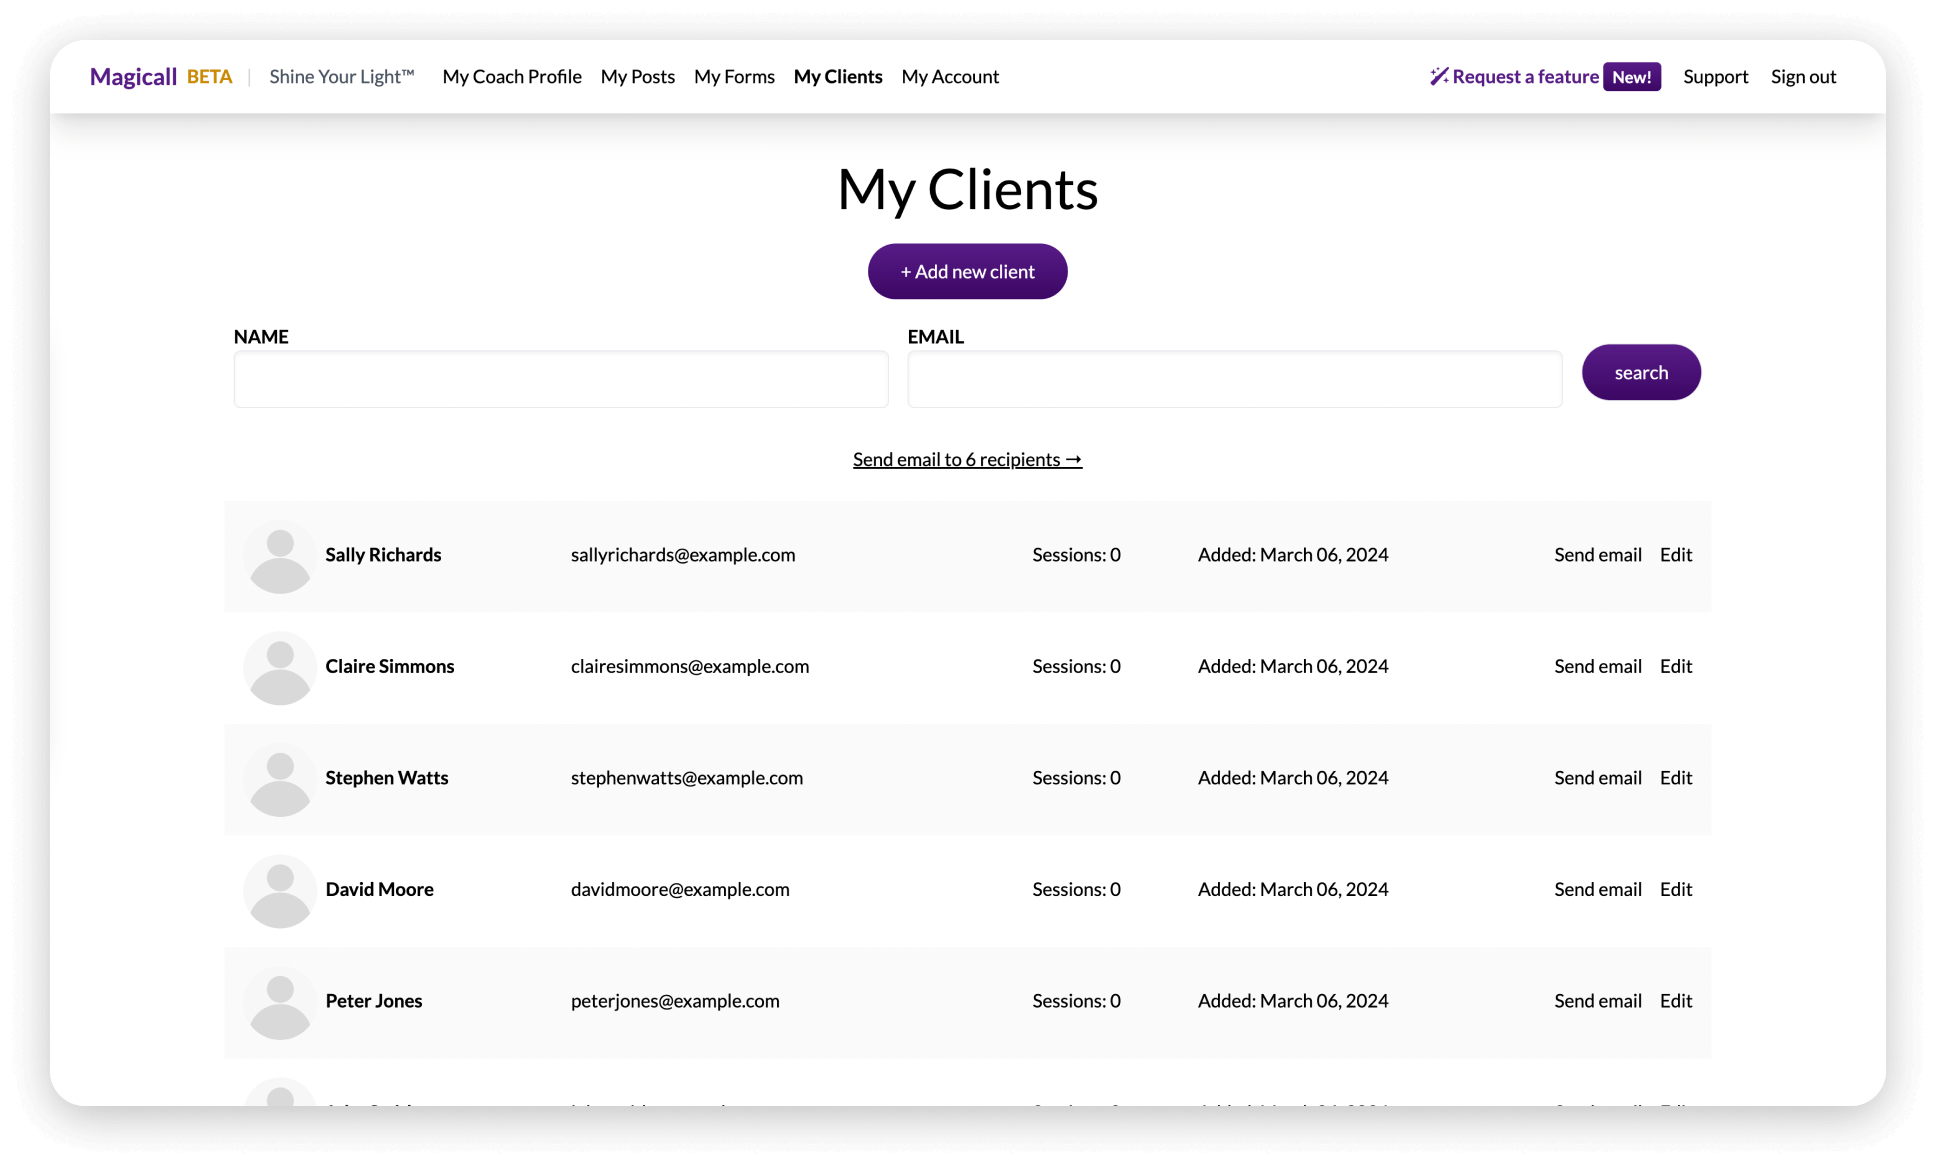 Keep track of all your clients and sessions | Magicall™